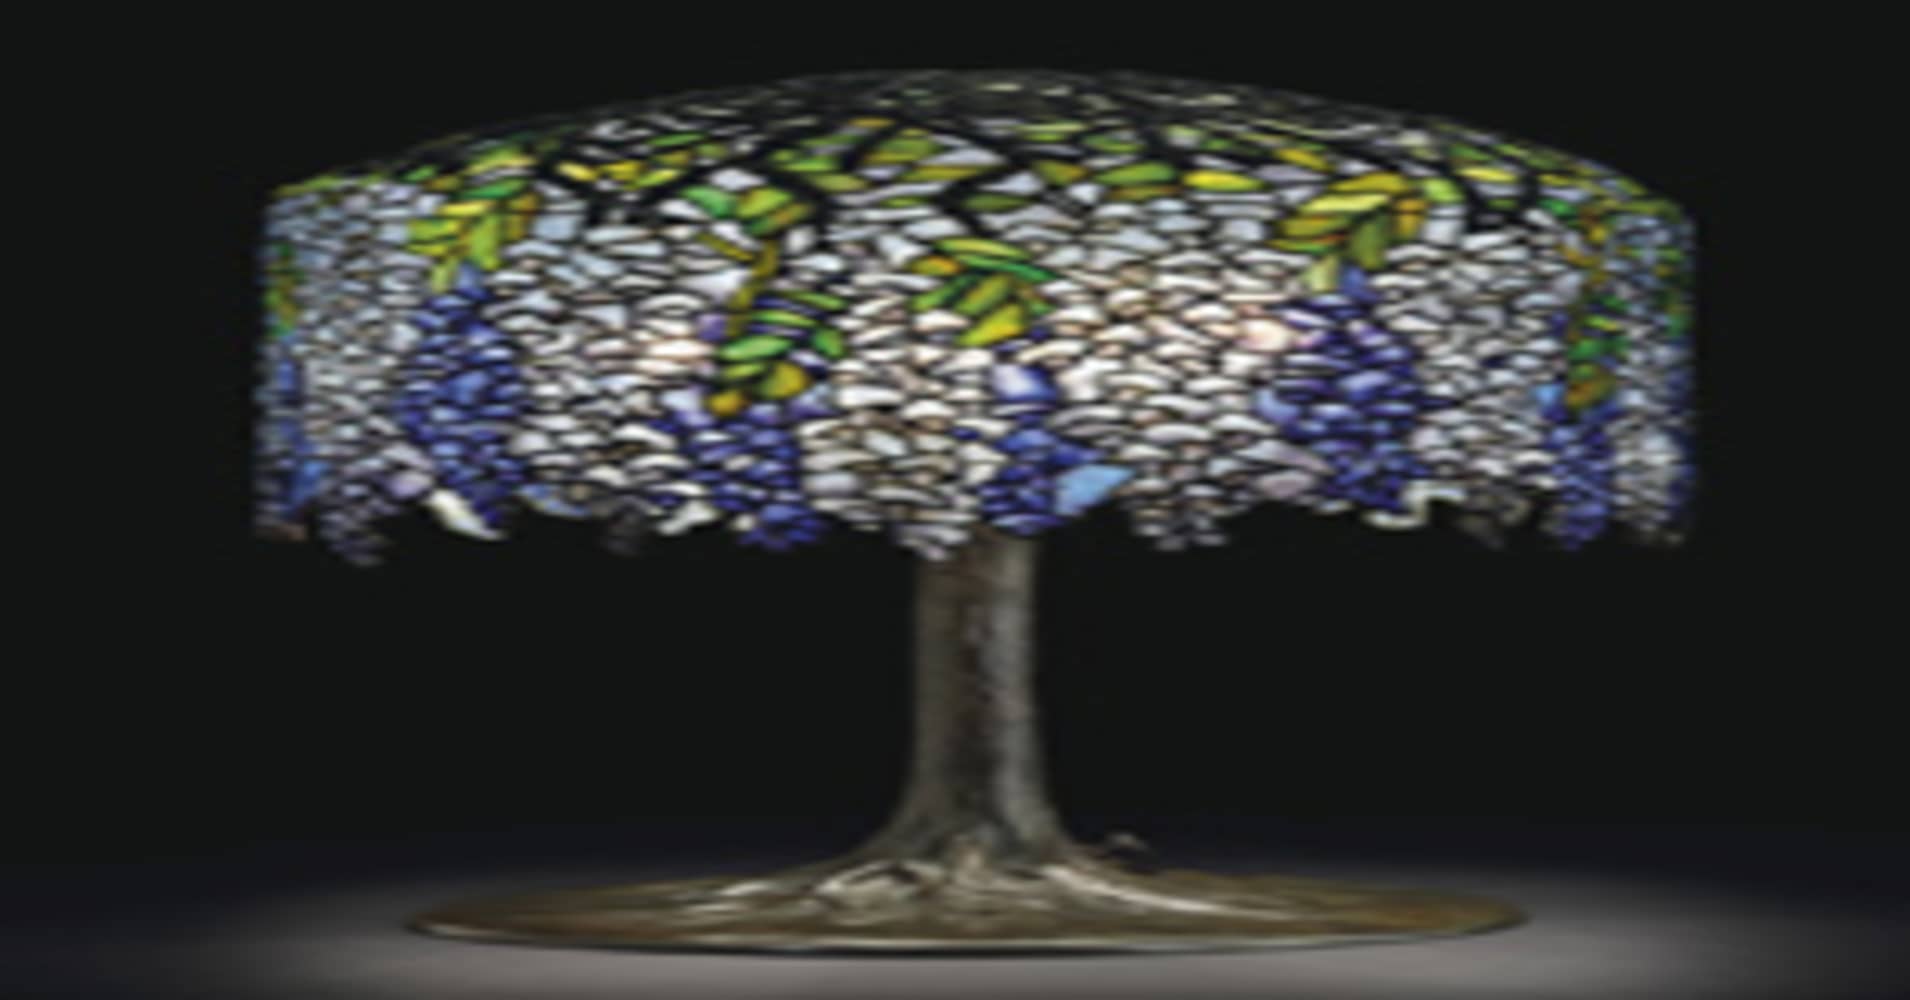 How To Spot An Authentic Tiffany Lamp